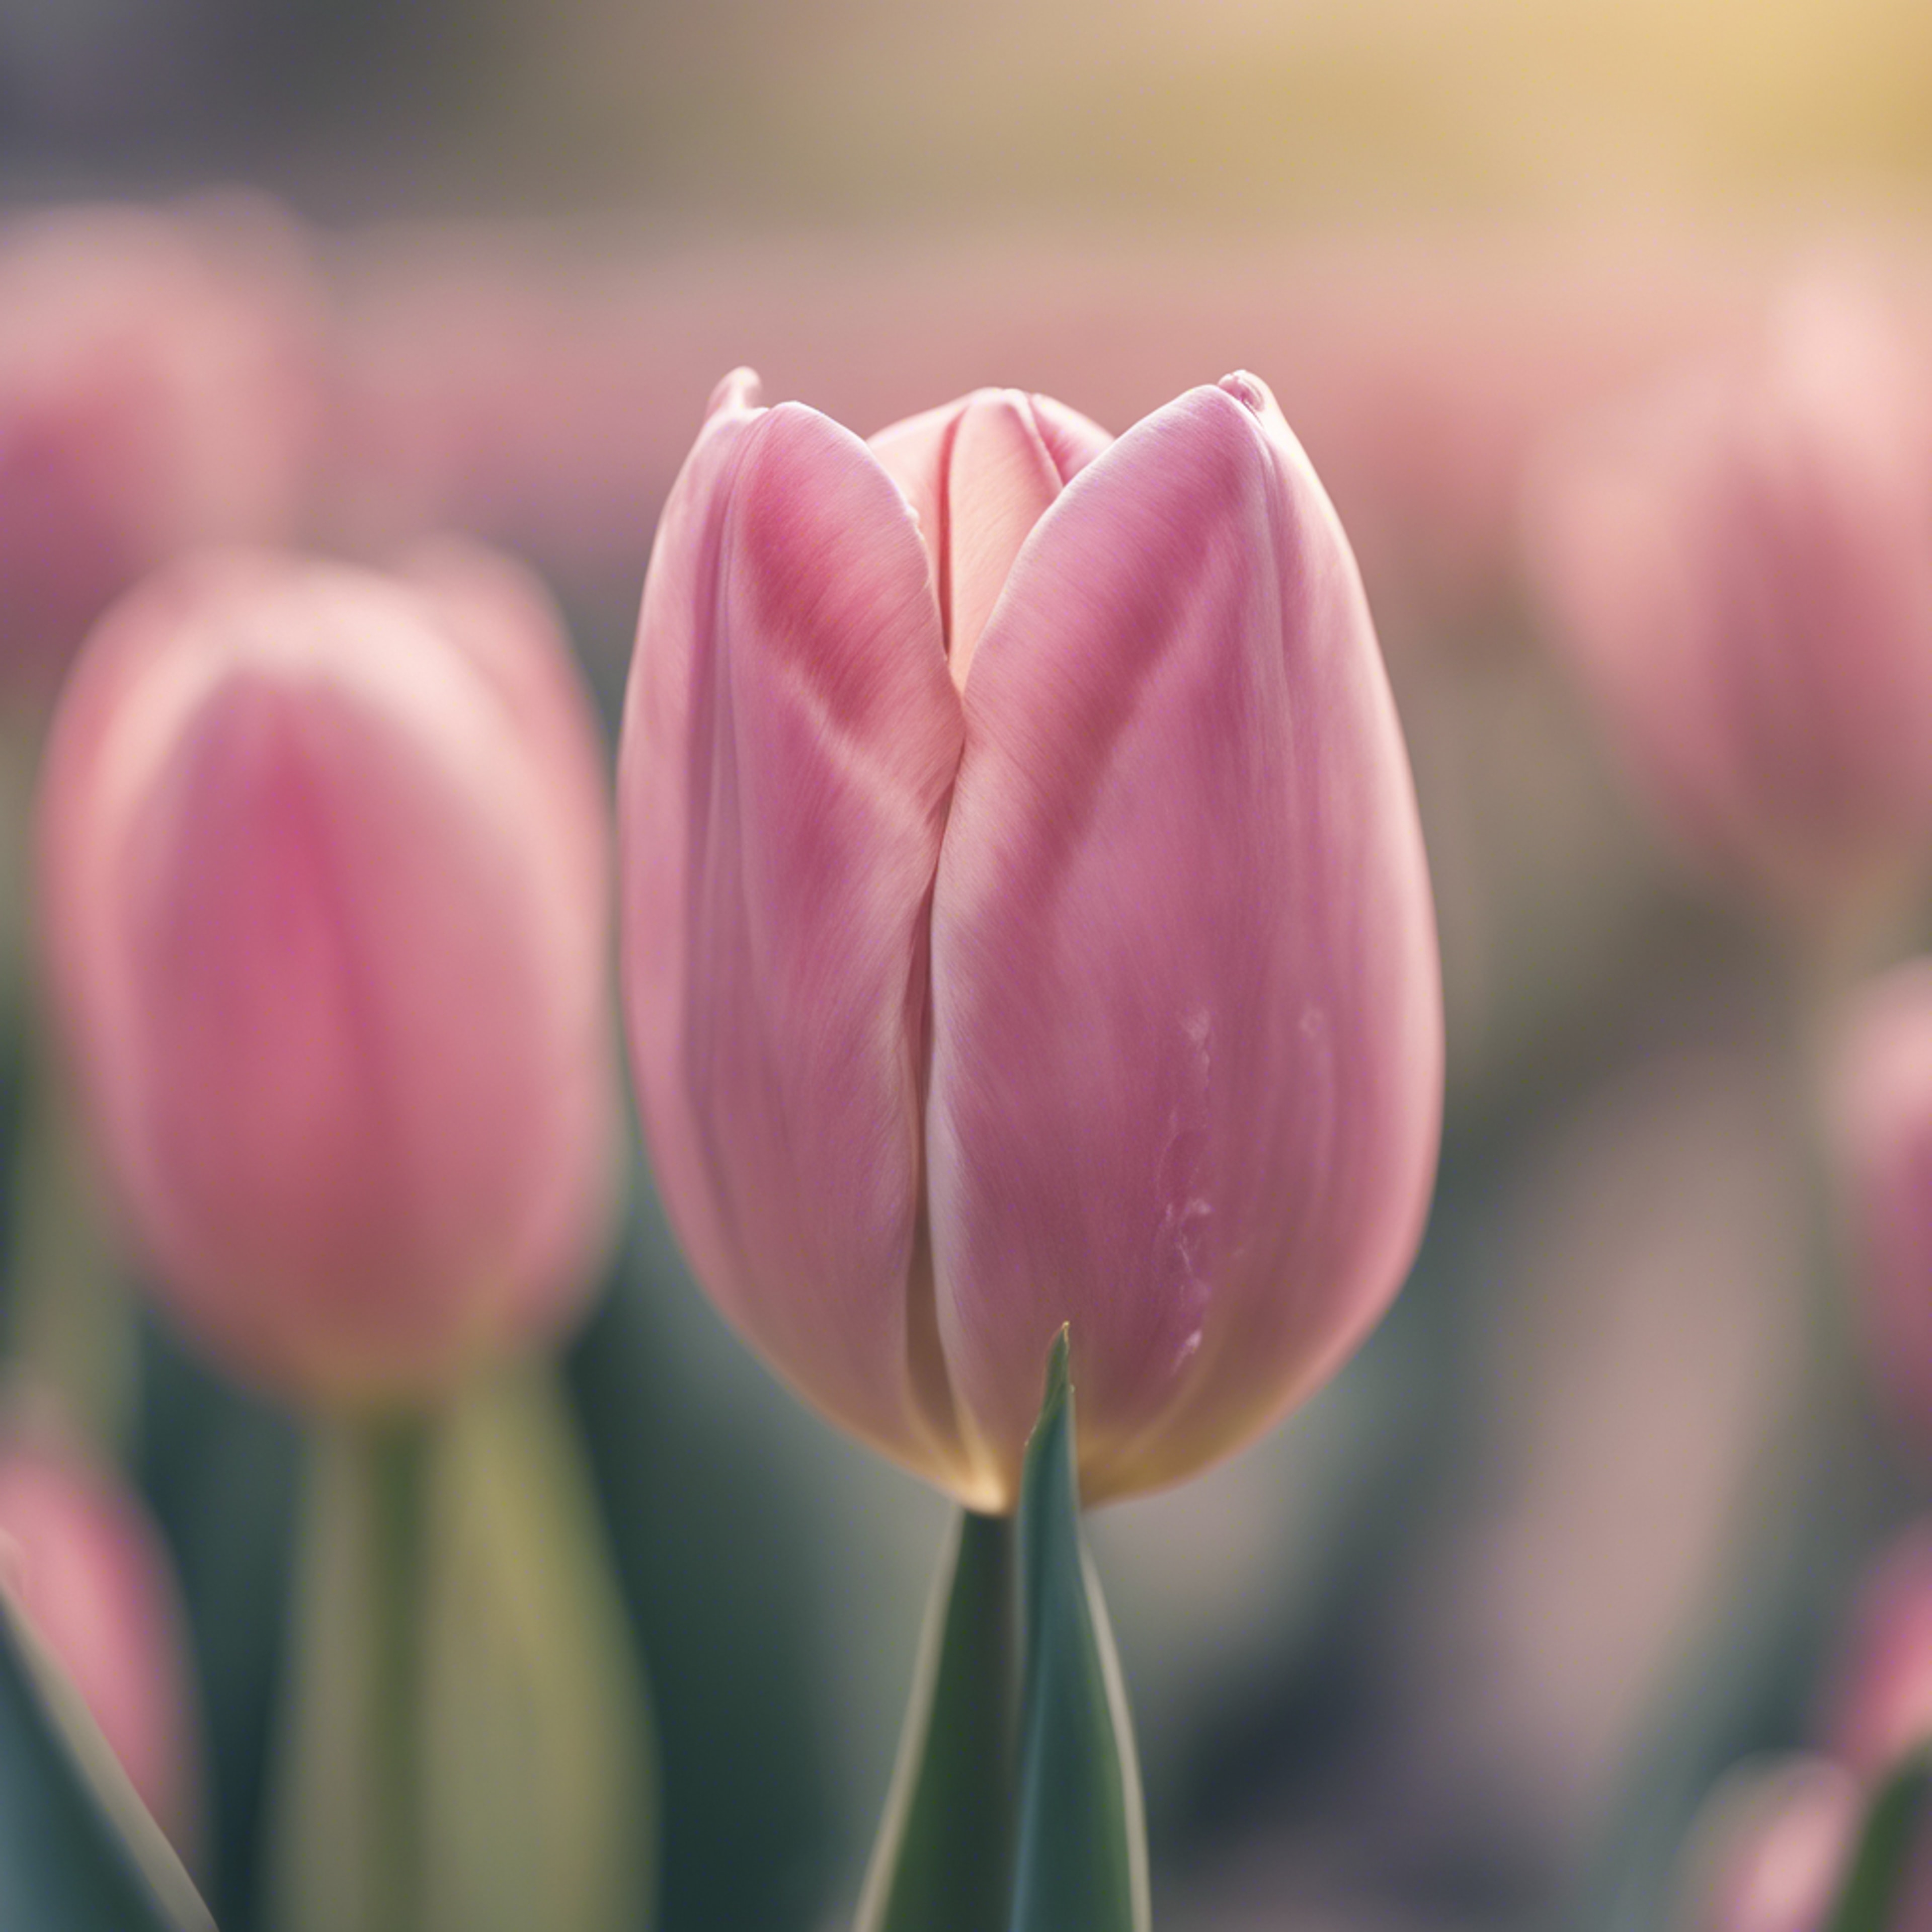 A close-up of a lone pink tulip against a soft and blurry pastel background Tapeet[4132f8cb968043e28bd5]